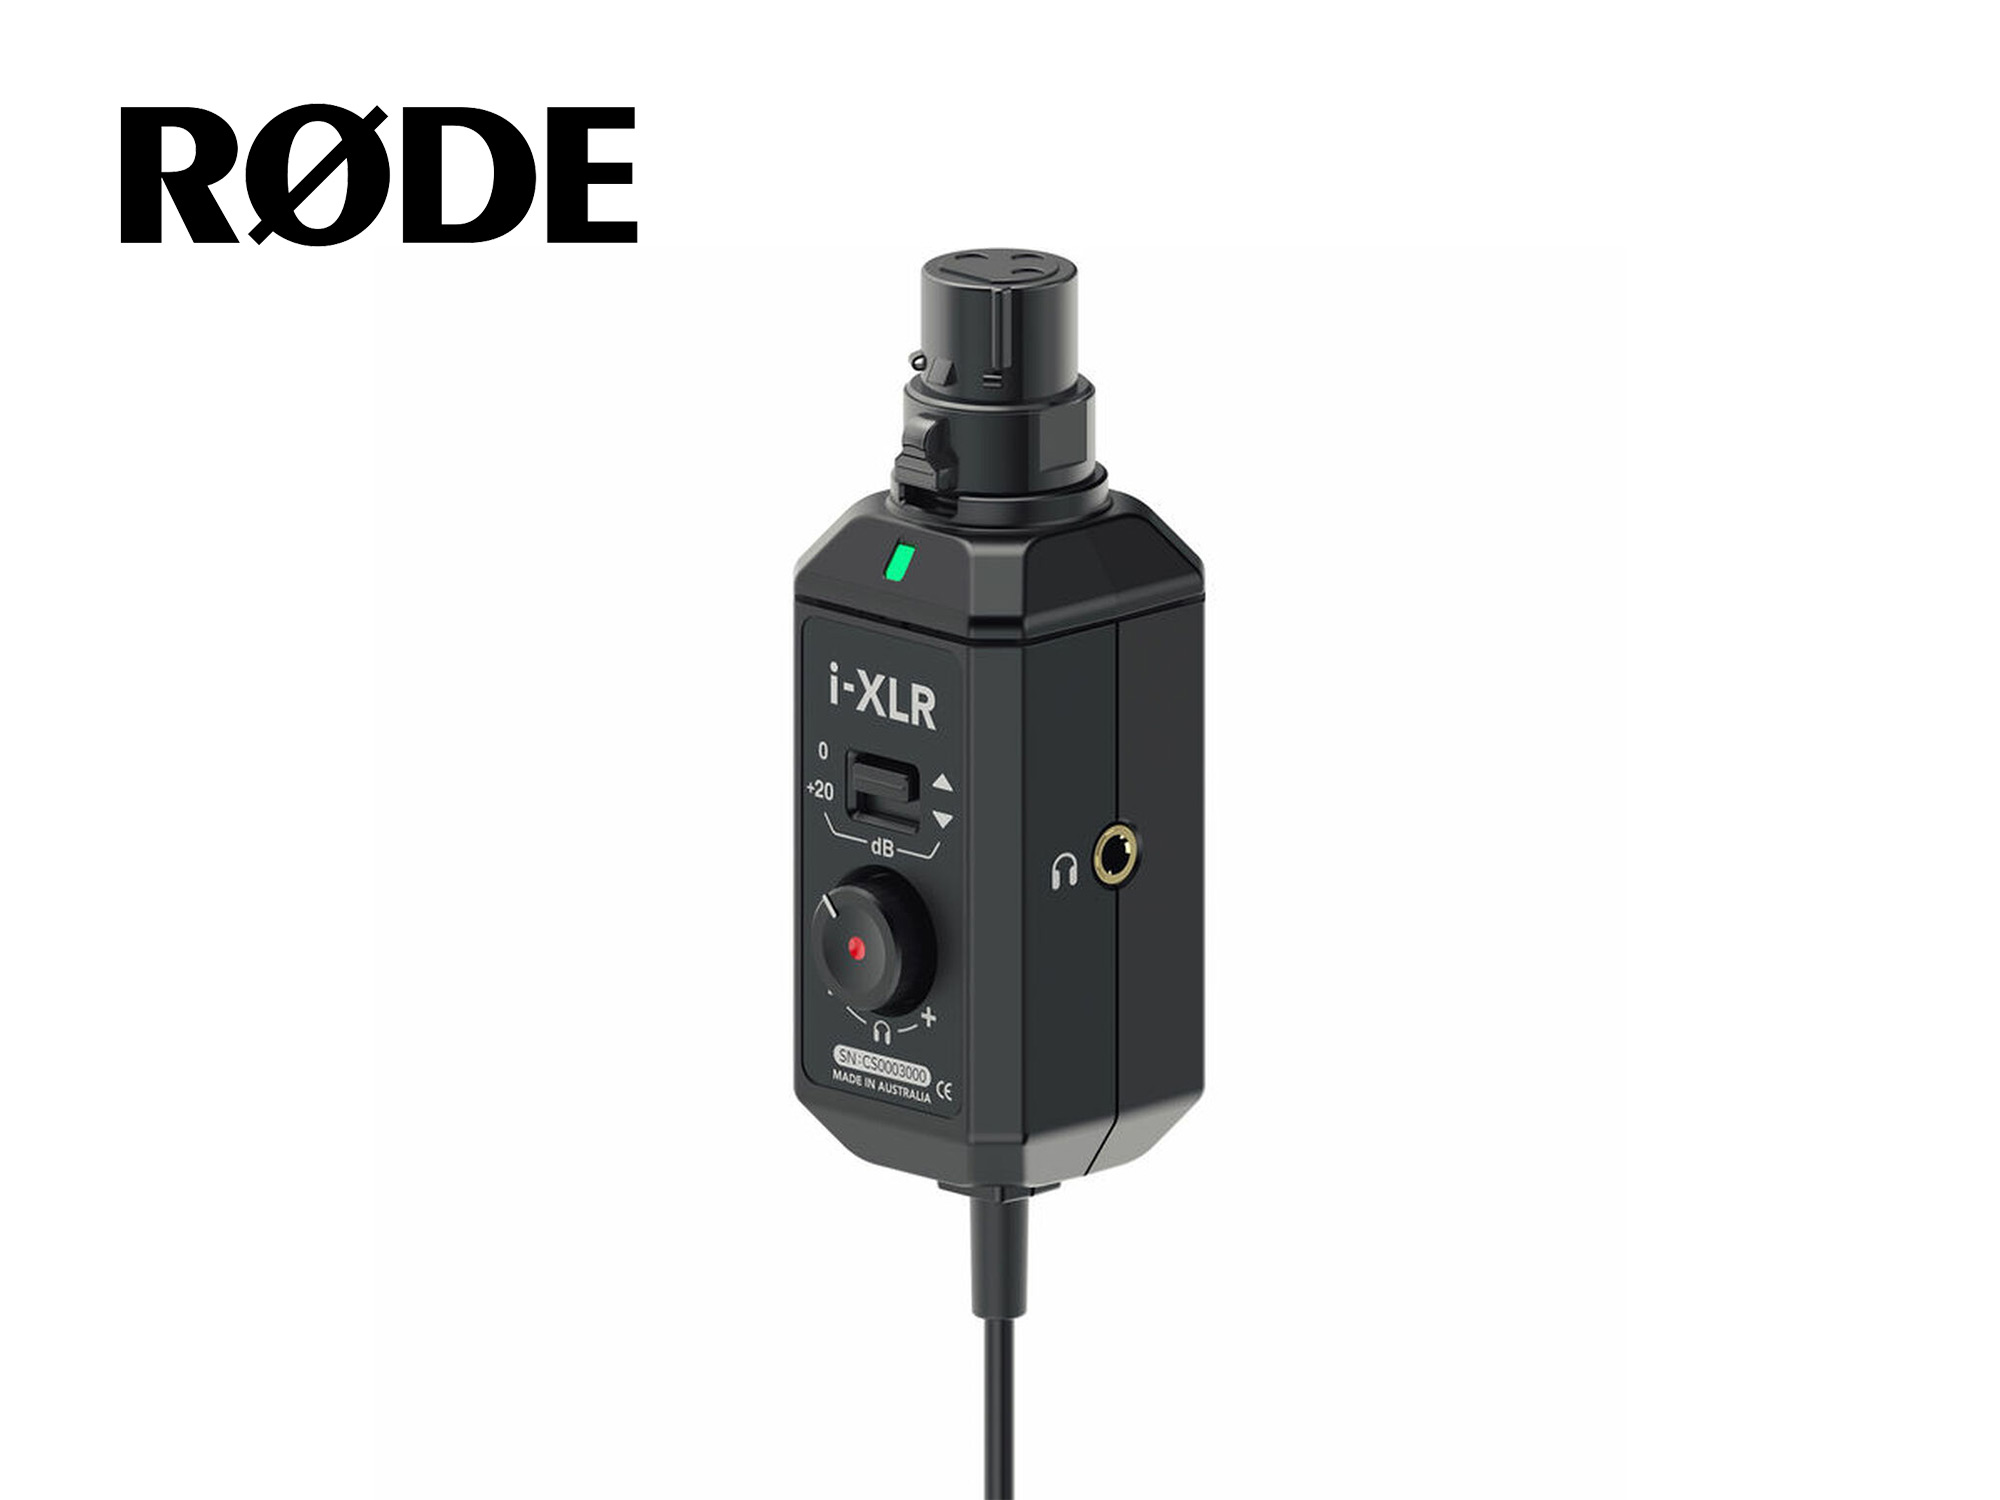 Rode XLR to Lightning Adapter for iOS devices